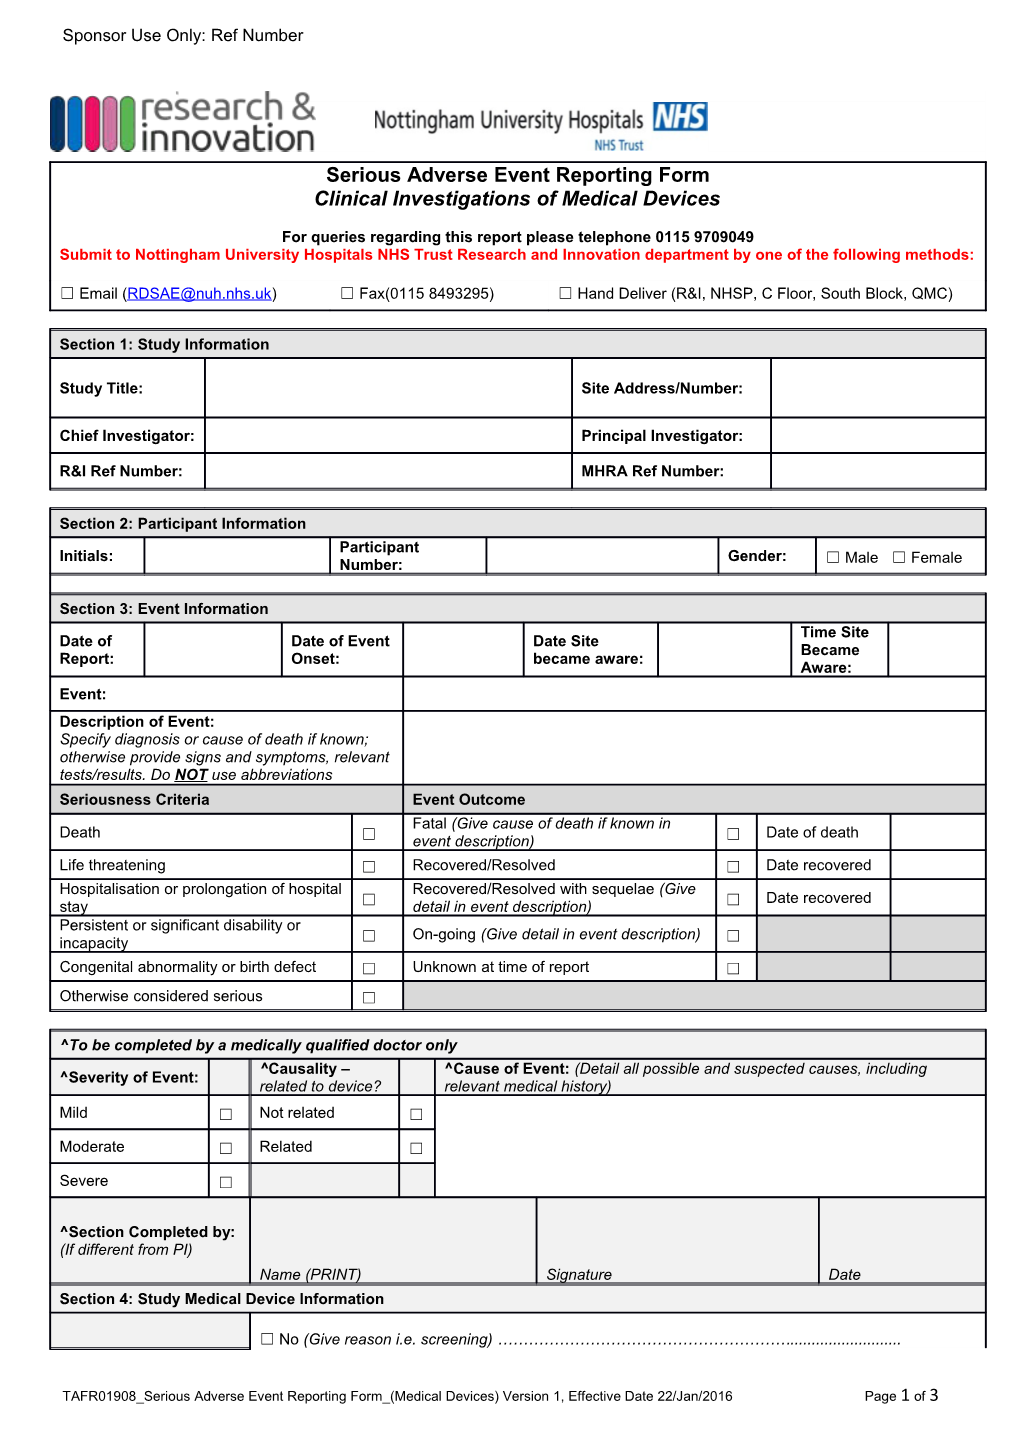 TAFR01908 Serious Adverse Event Reporting Form (Medical Devices) Version 1, Effective Date